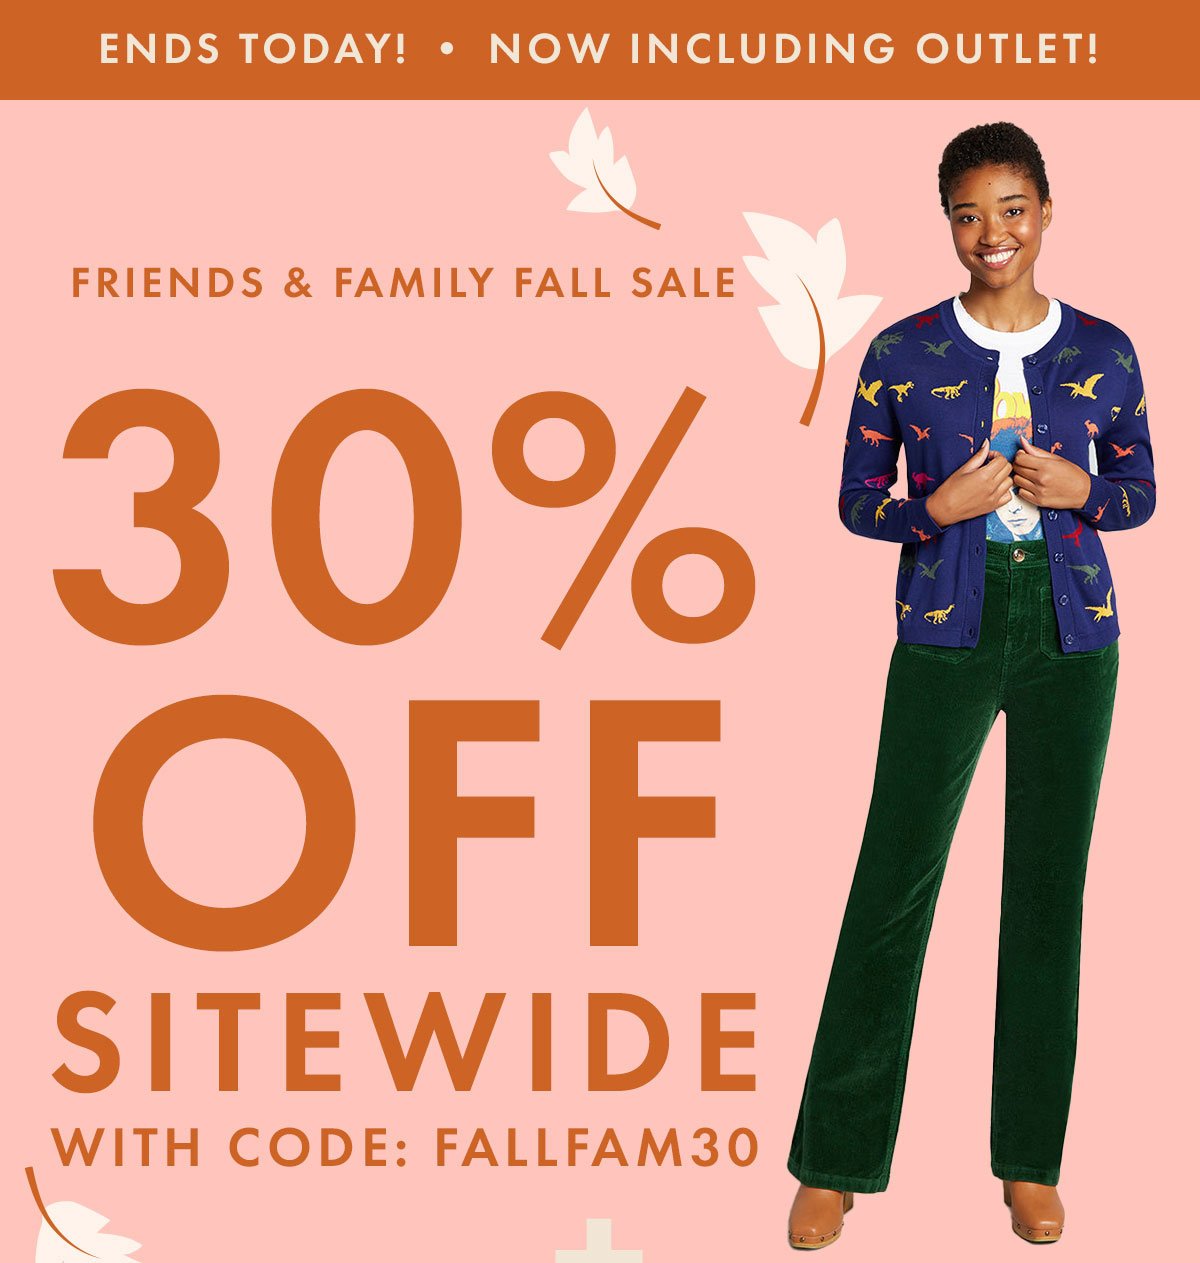 Friends & Family Fall Sale | 30% Off Sitewide with Code: FALLFAM30